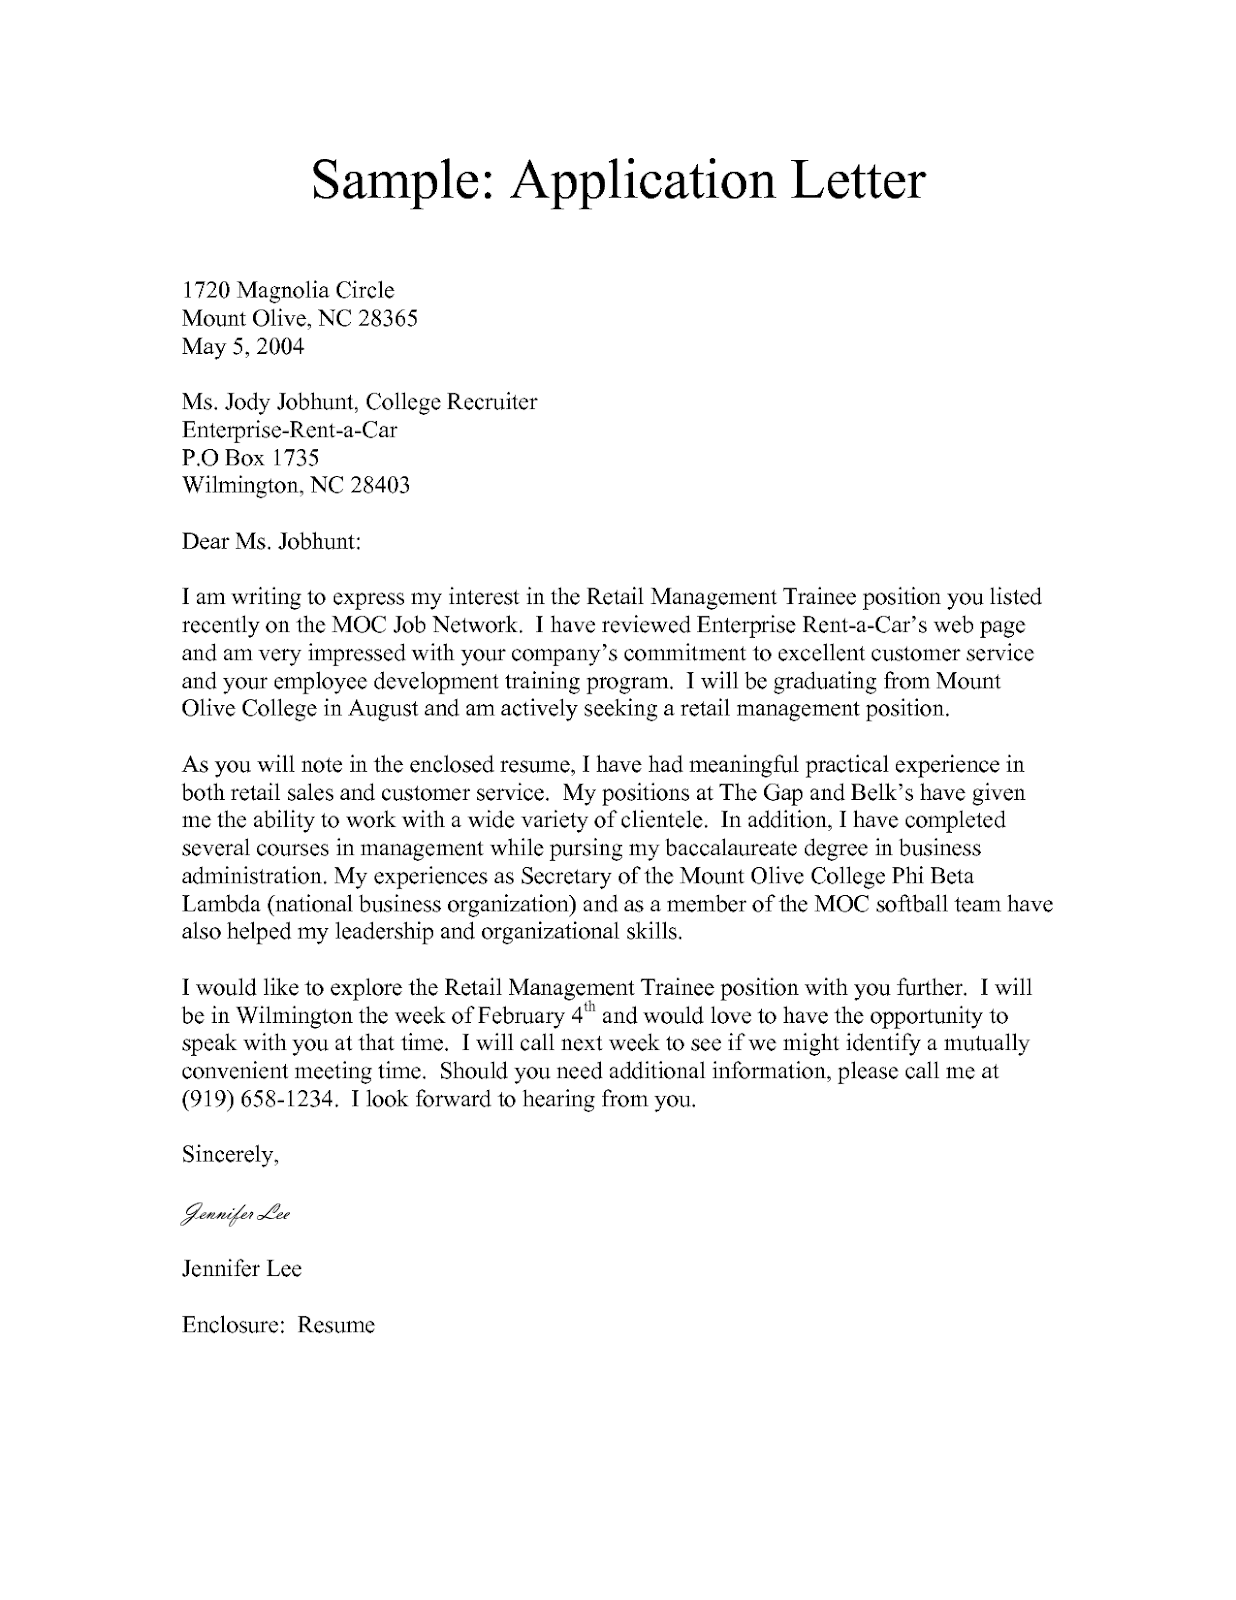 a application letter for a job